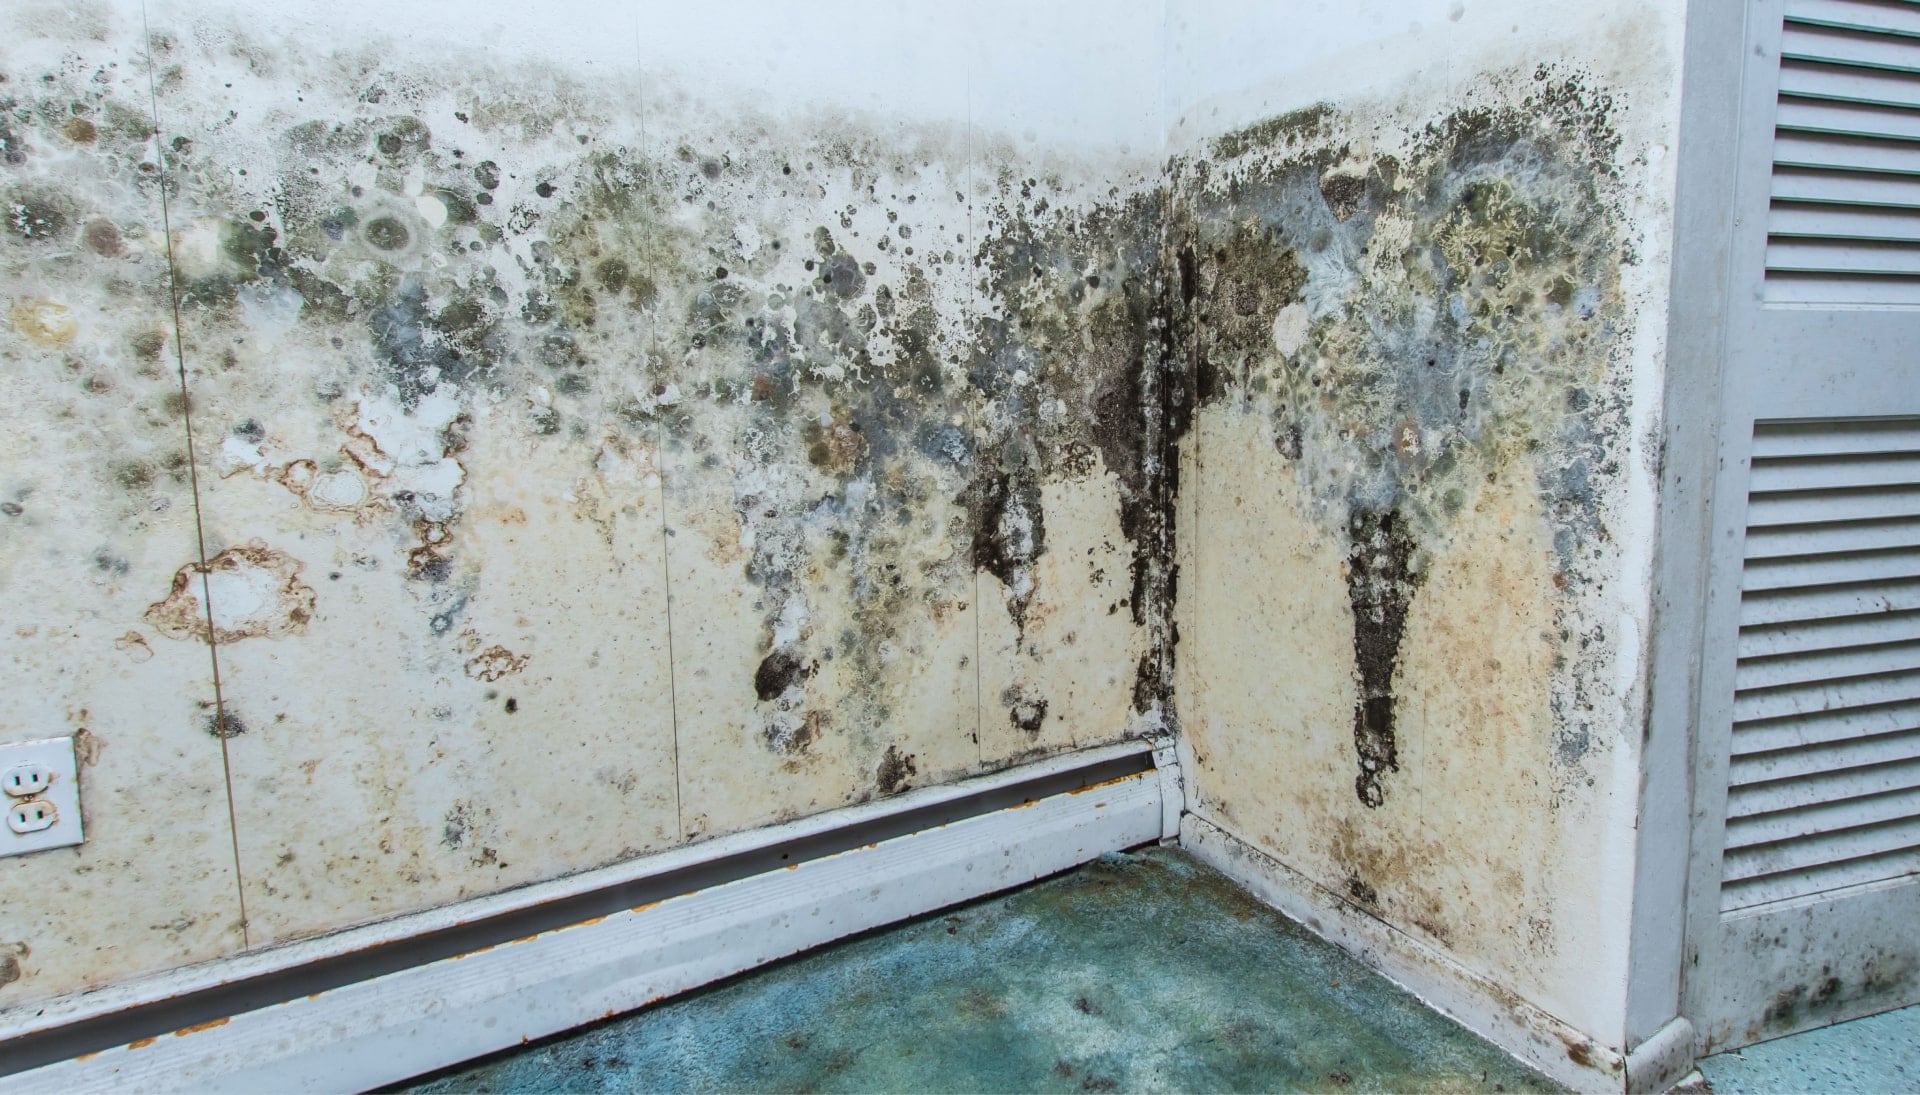 Professional mold removal, odor control, and water damage restoration service in Fort Myers, Florida.